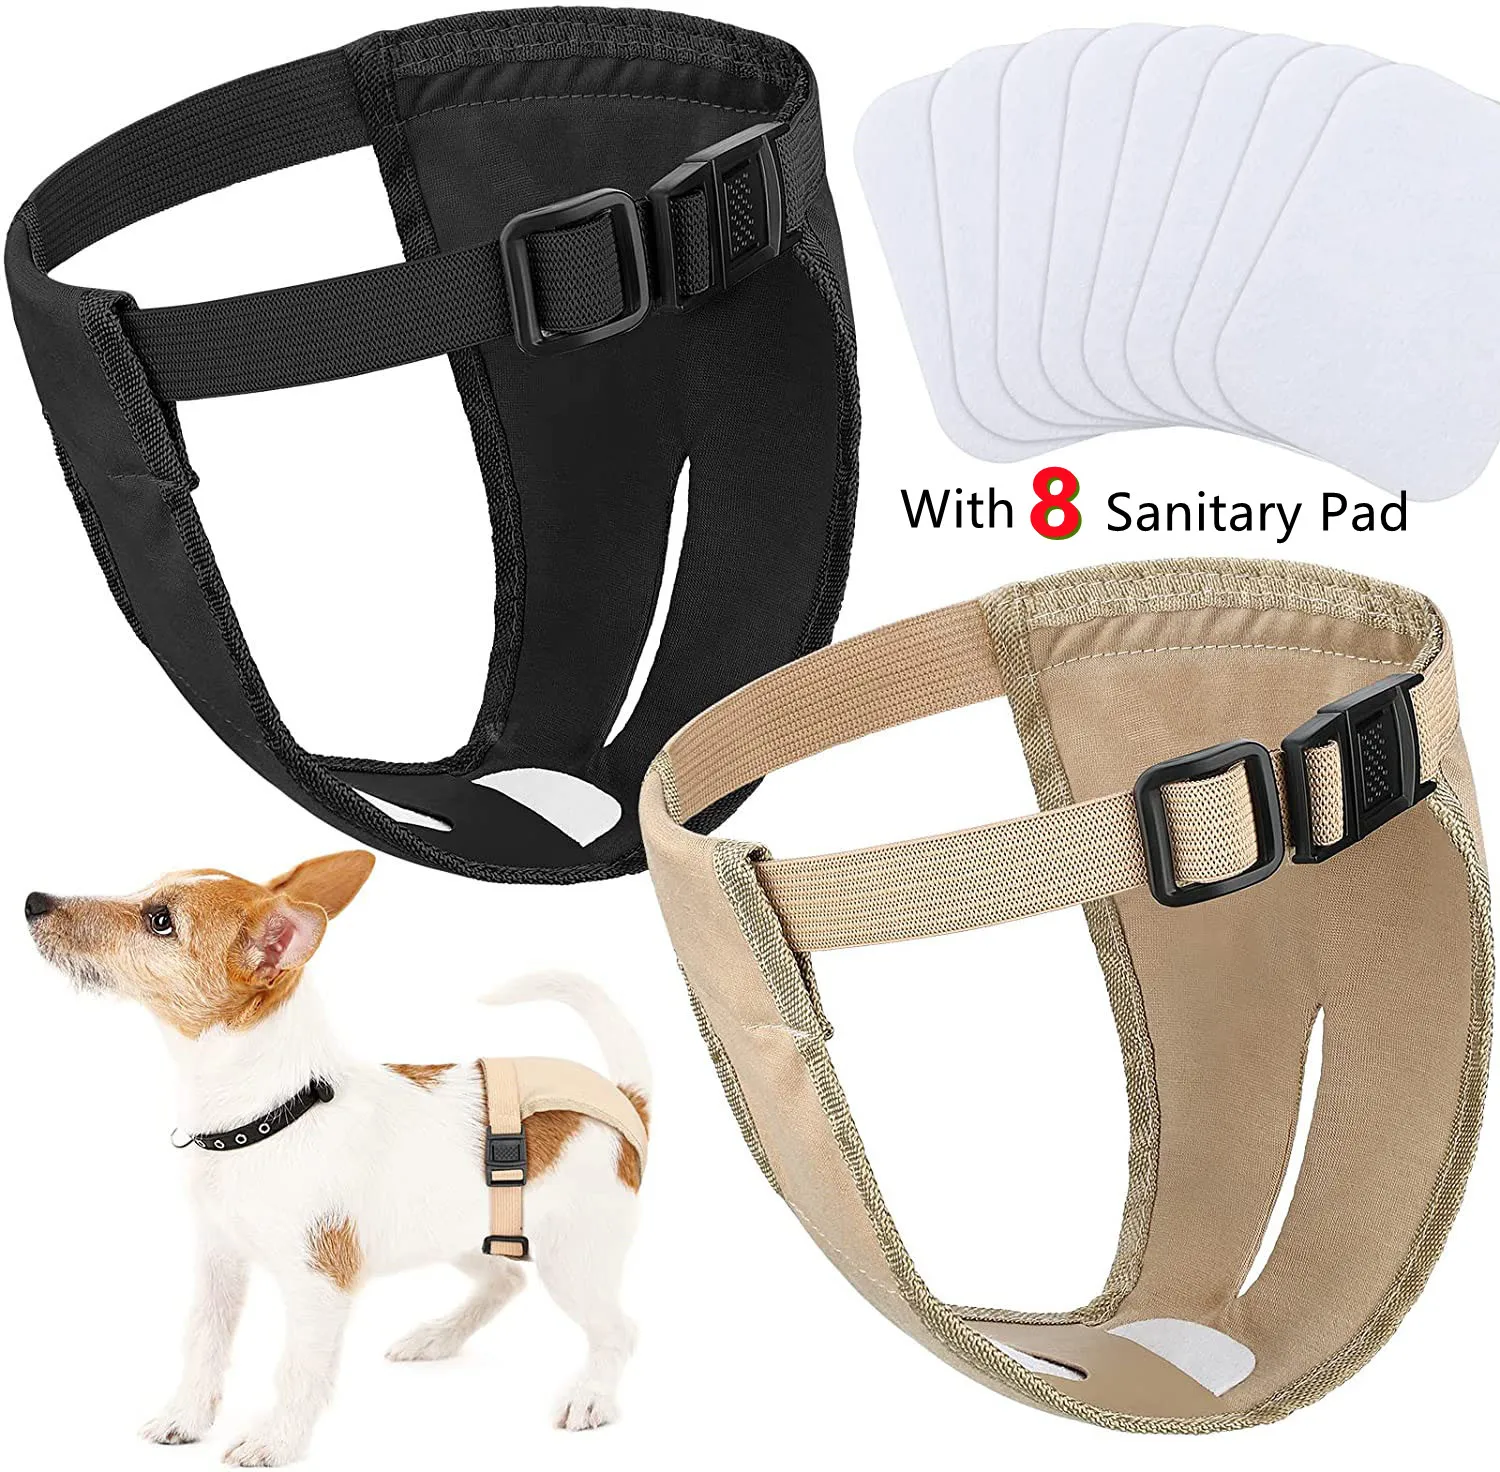 

For Heat Pad With Trousers Physiological Adjustable In Pants Protective Dog 8 Monthly Sanitary Washable Bleeding Female Nappies